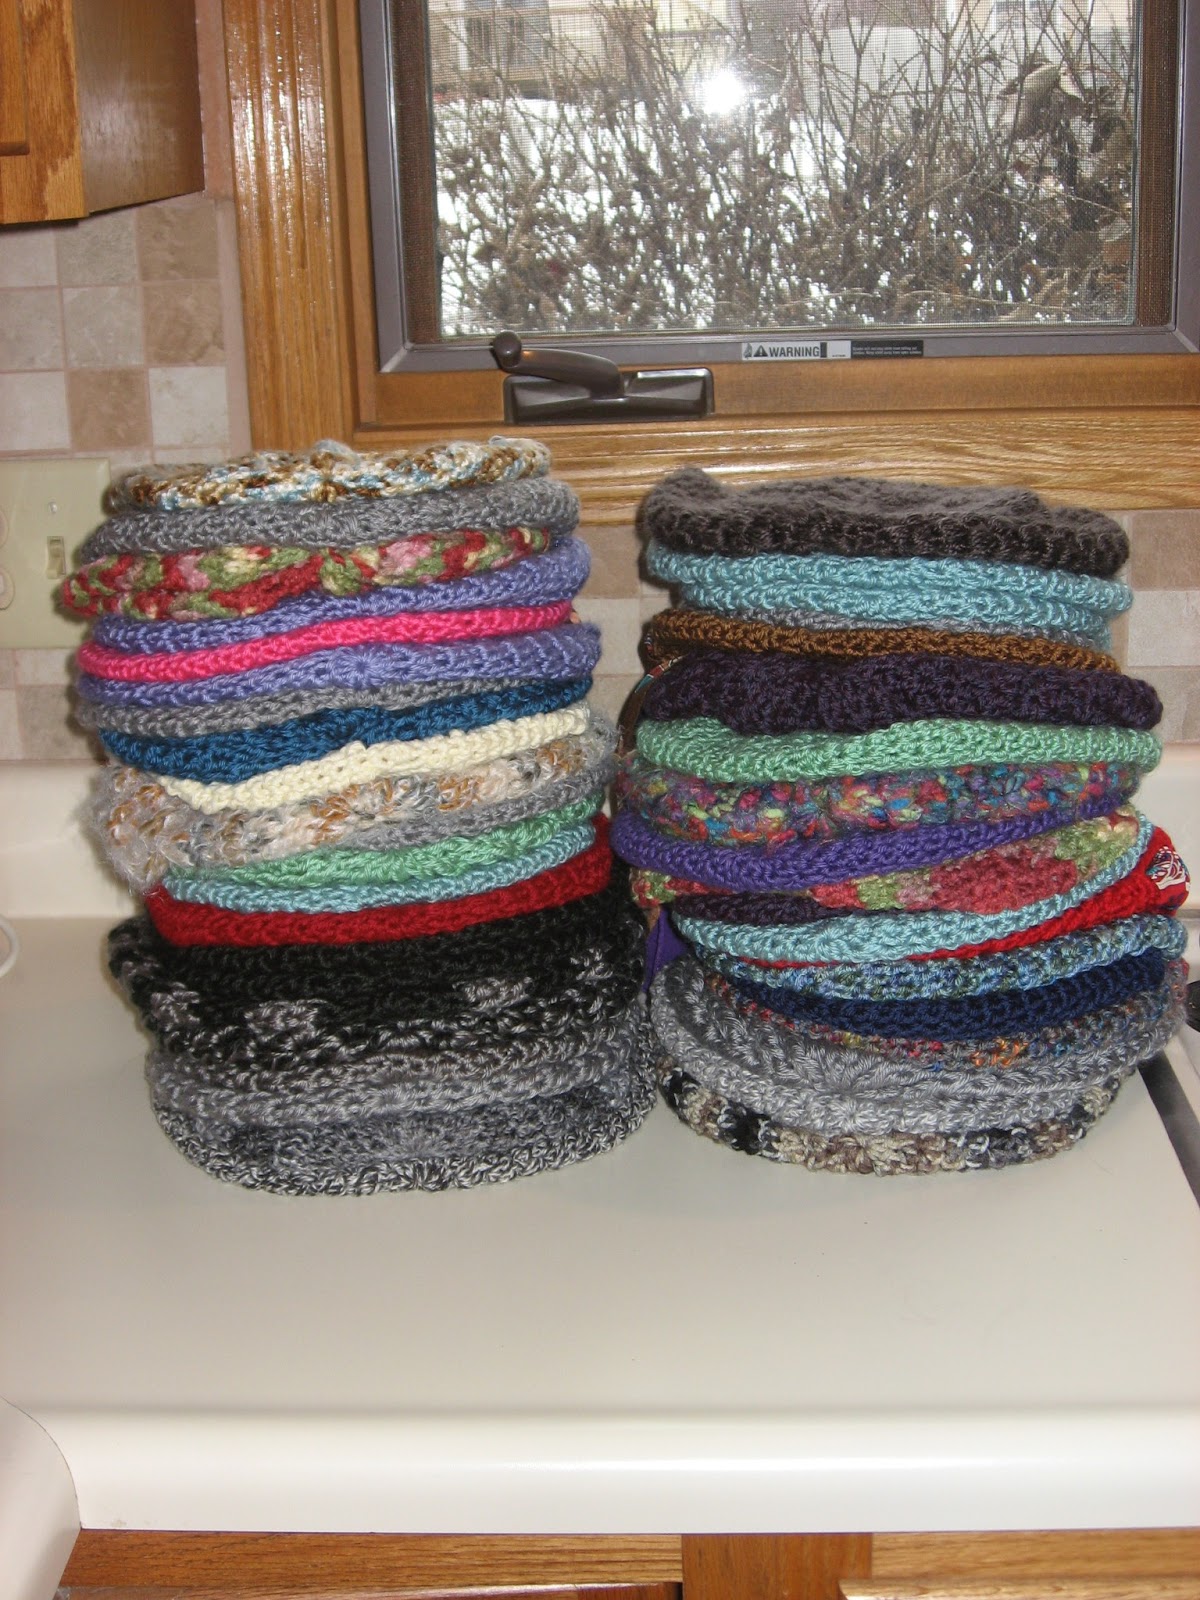 Crochet Projects: More Chemo hats!